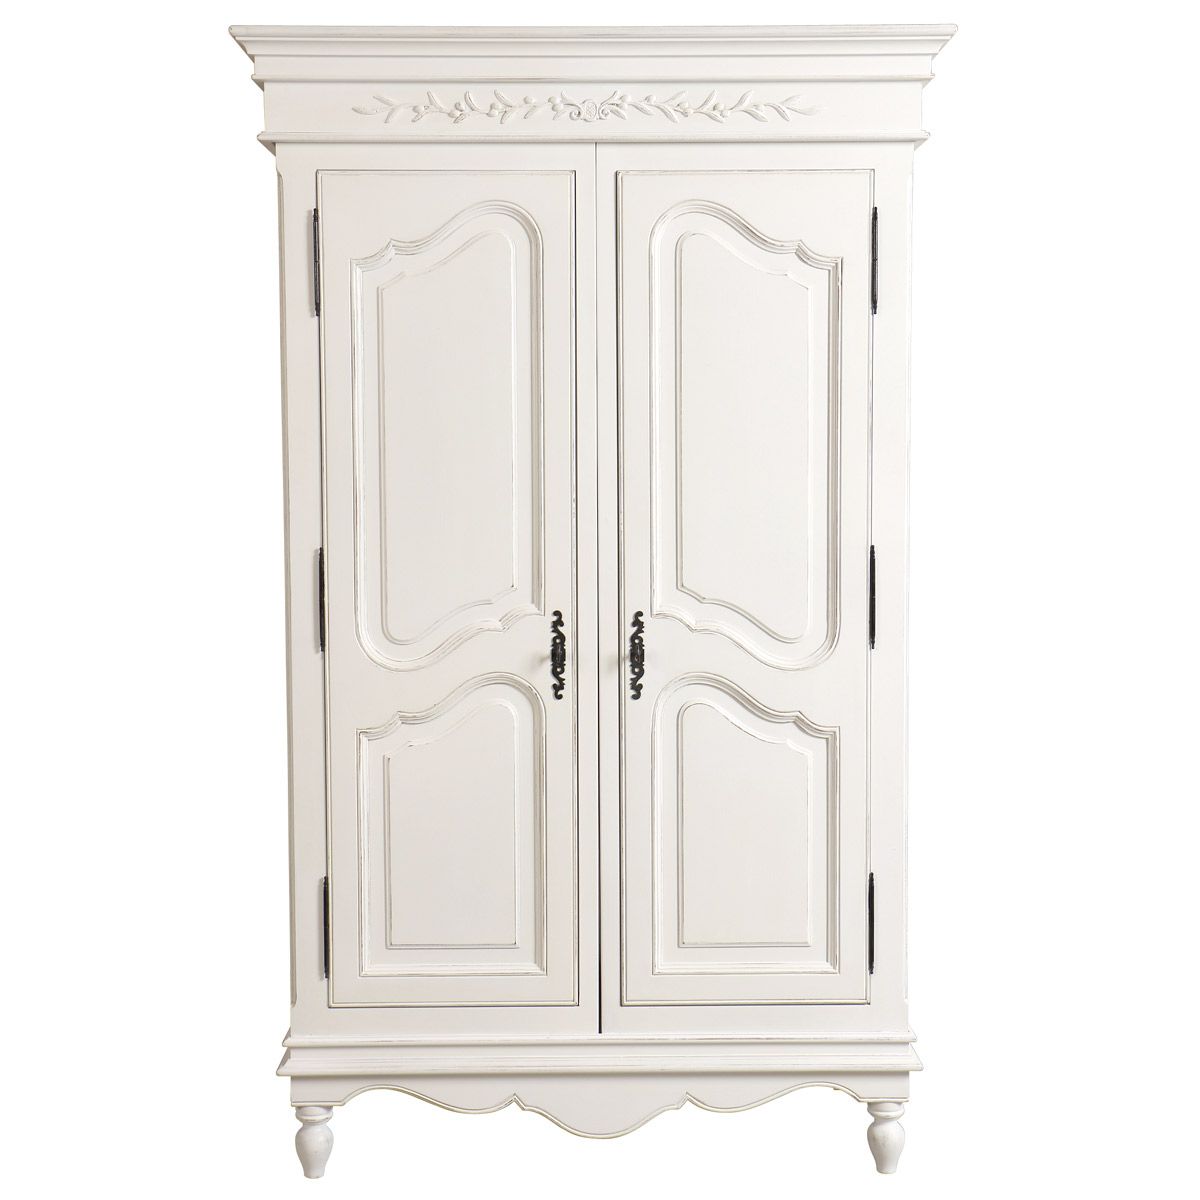 French Armoire Wardrobe – Romance – Low Cost Delivery, Nationwide Within French Armoire Wardrobes (View 3 of 15)